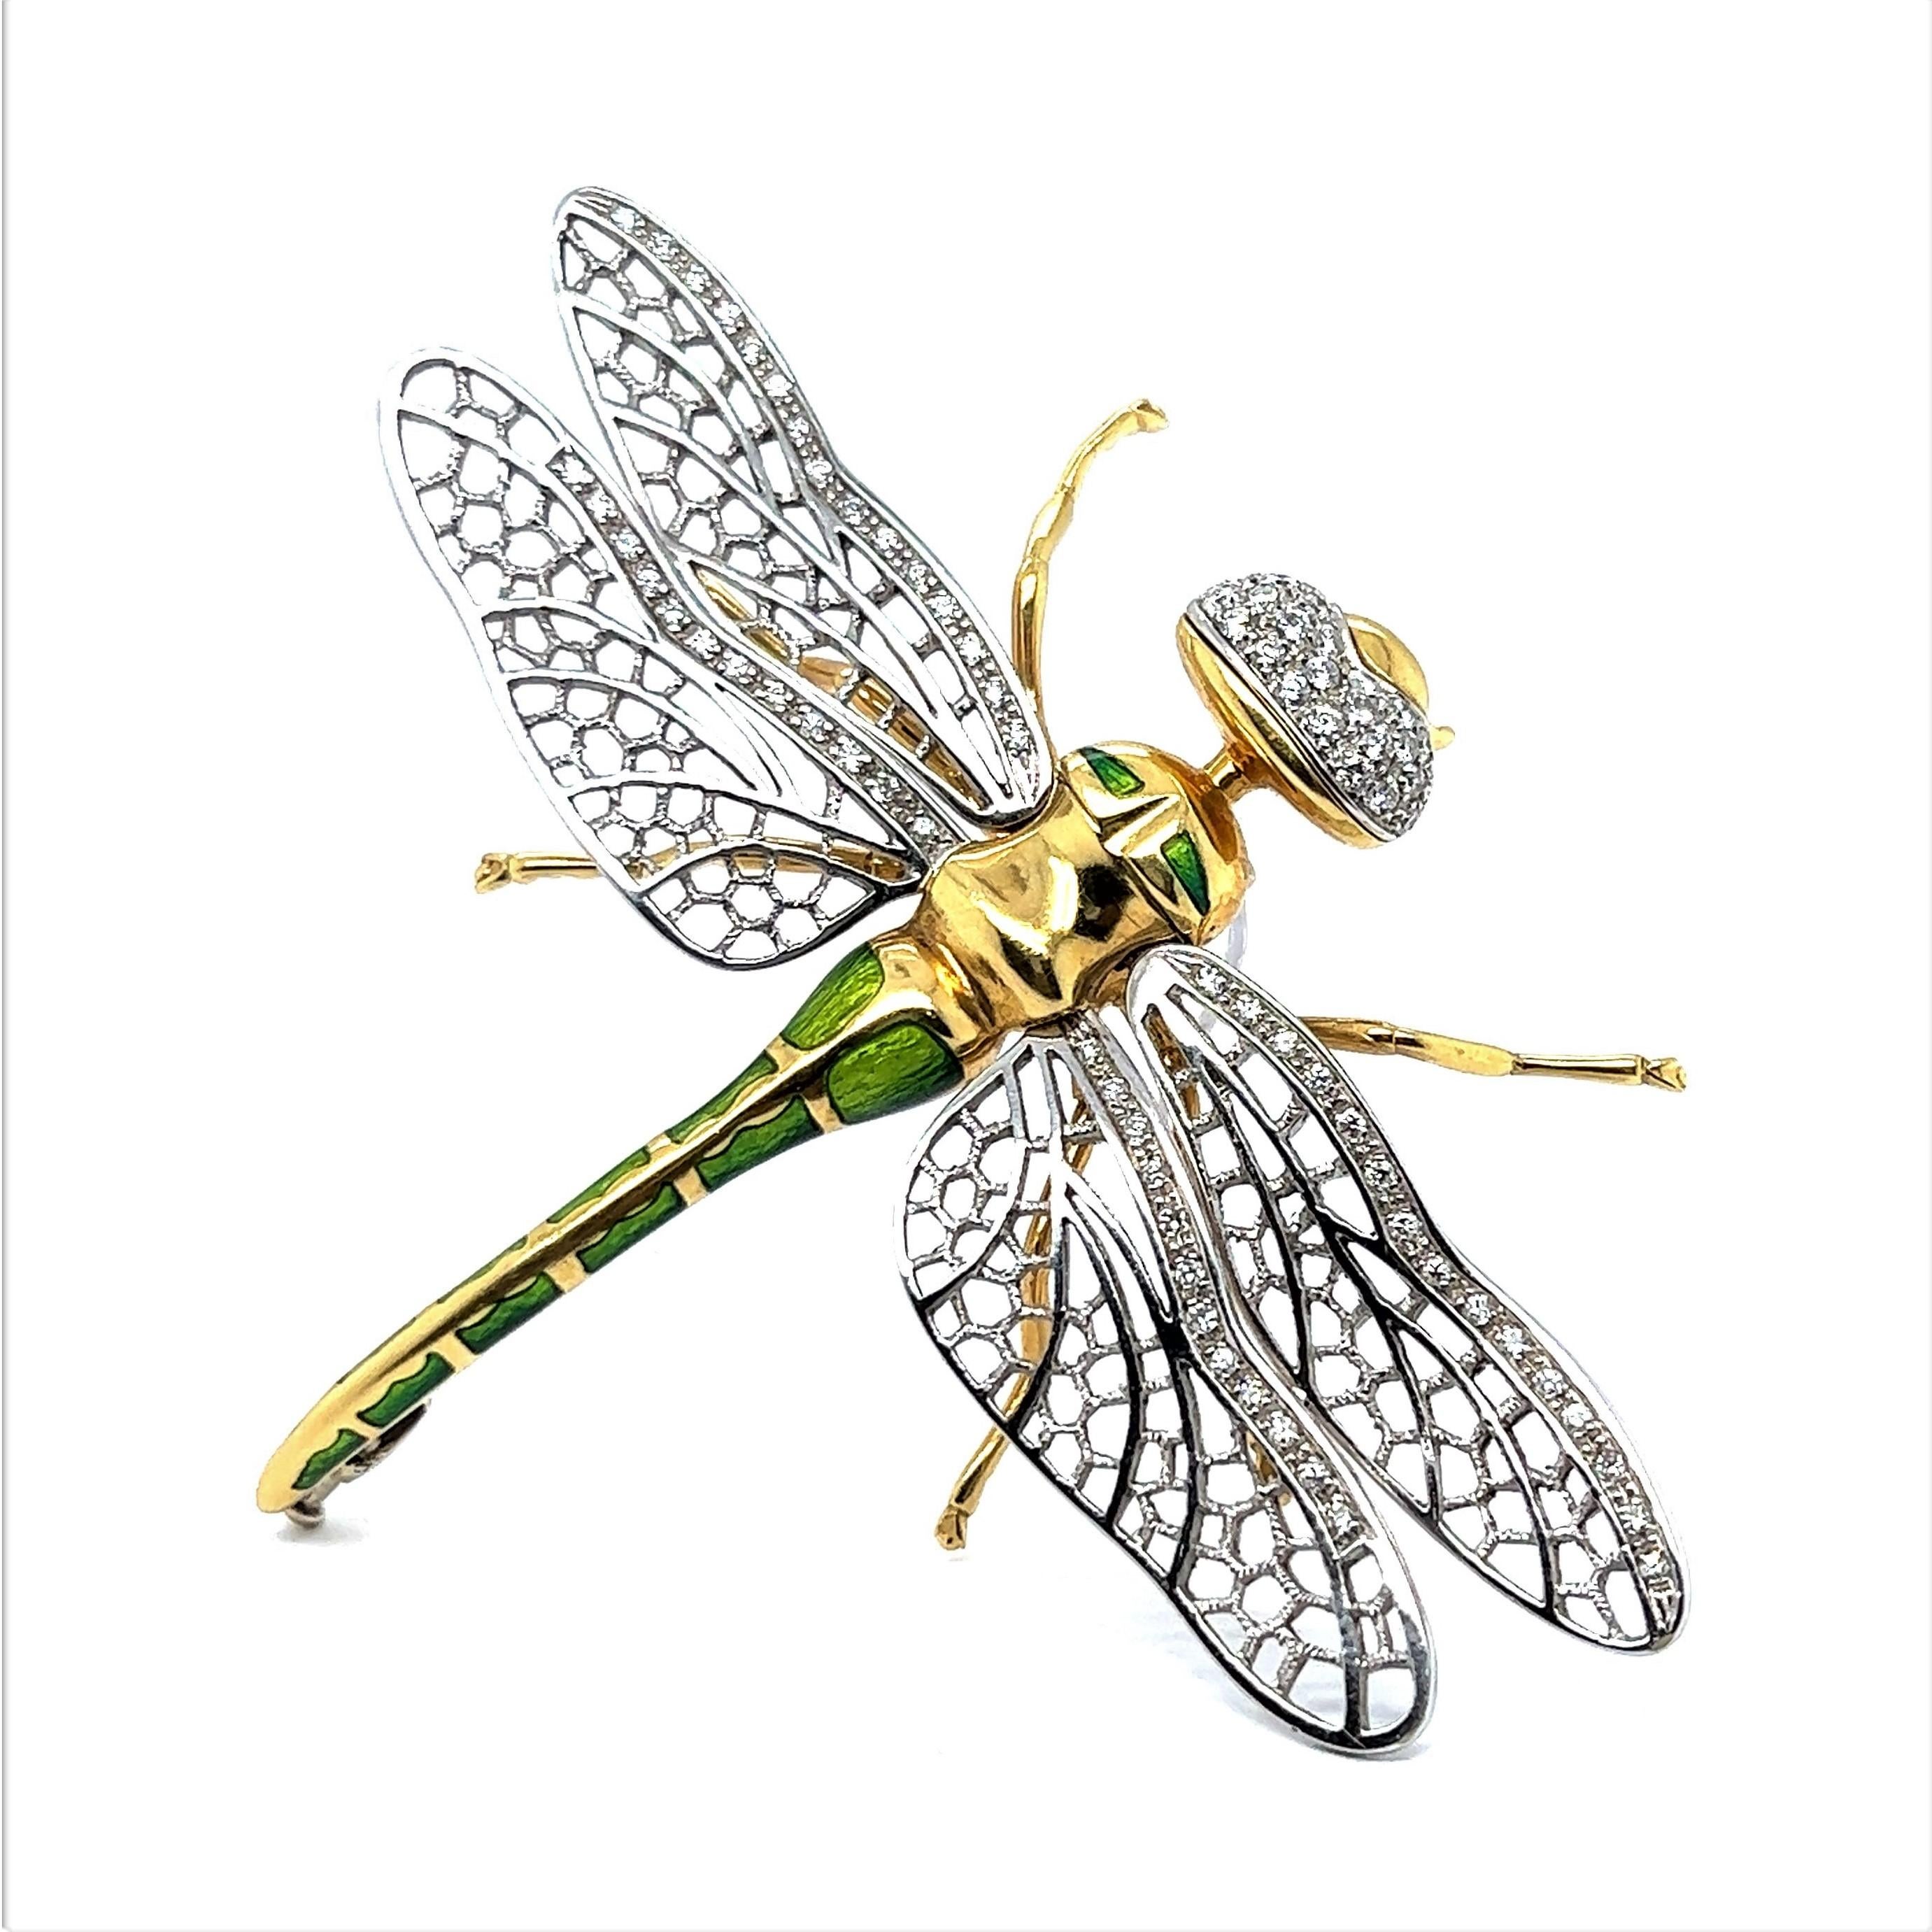 Trends have come and gone but the desire for beautiful botanical jewelry has persisted through the ages. Dragonflies are one of the most widely represented creatures of this motif. It dates back to the 19th century, when Art Nouveau jewelers were